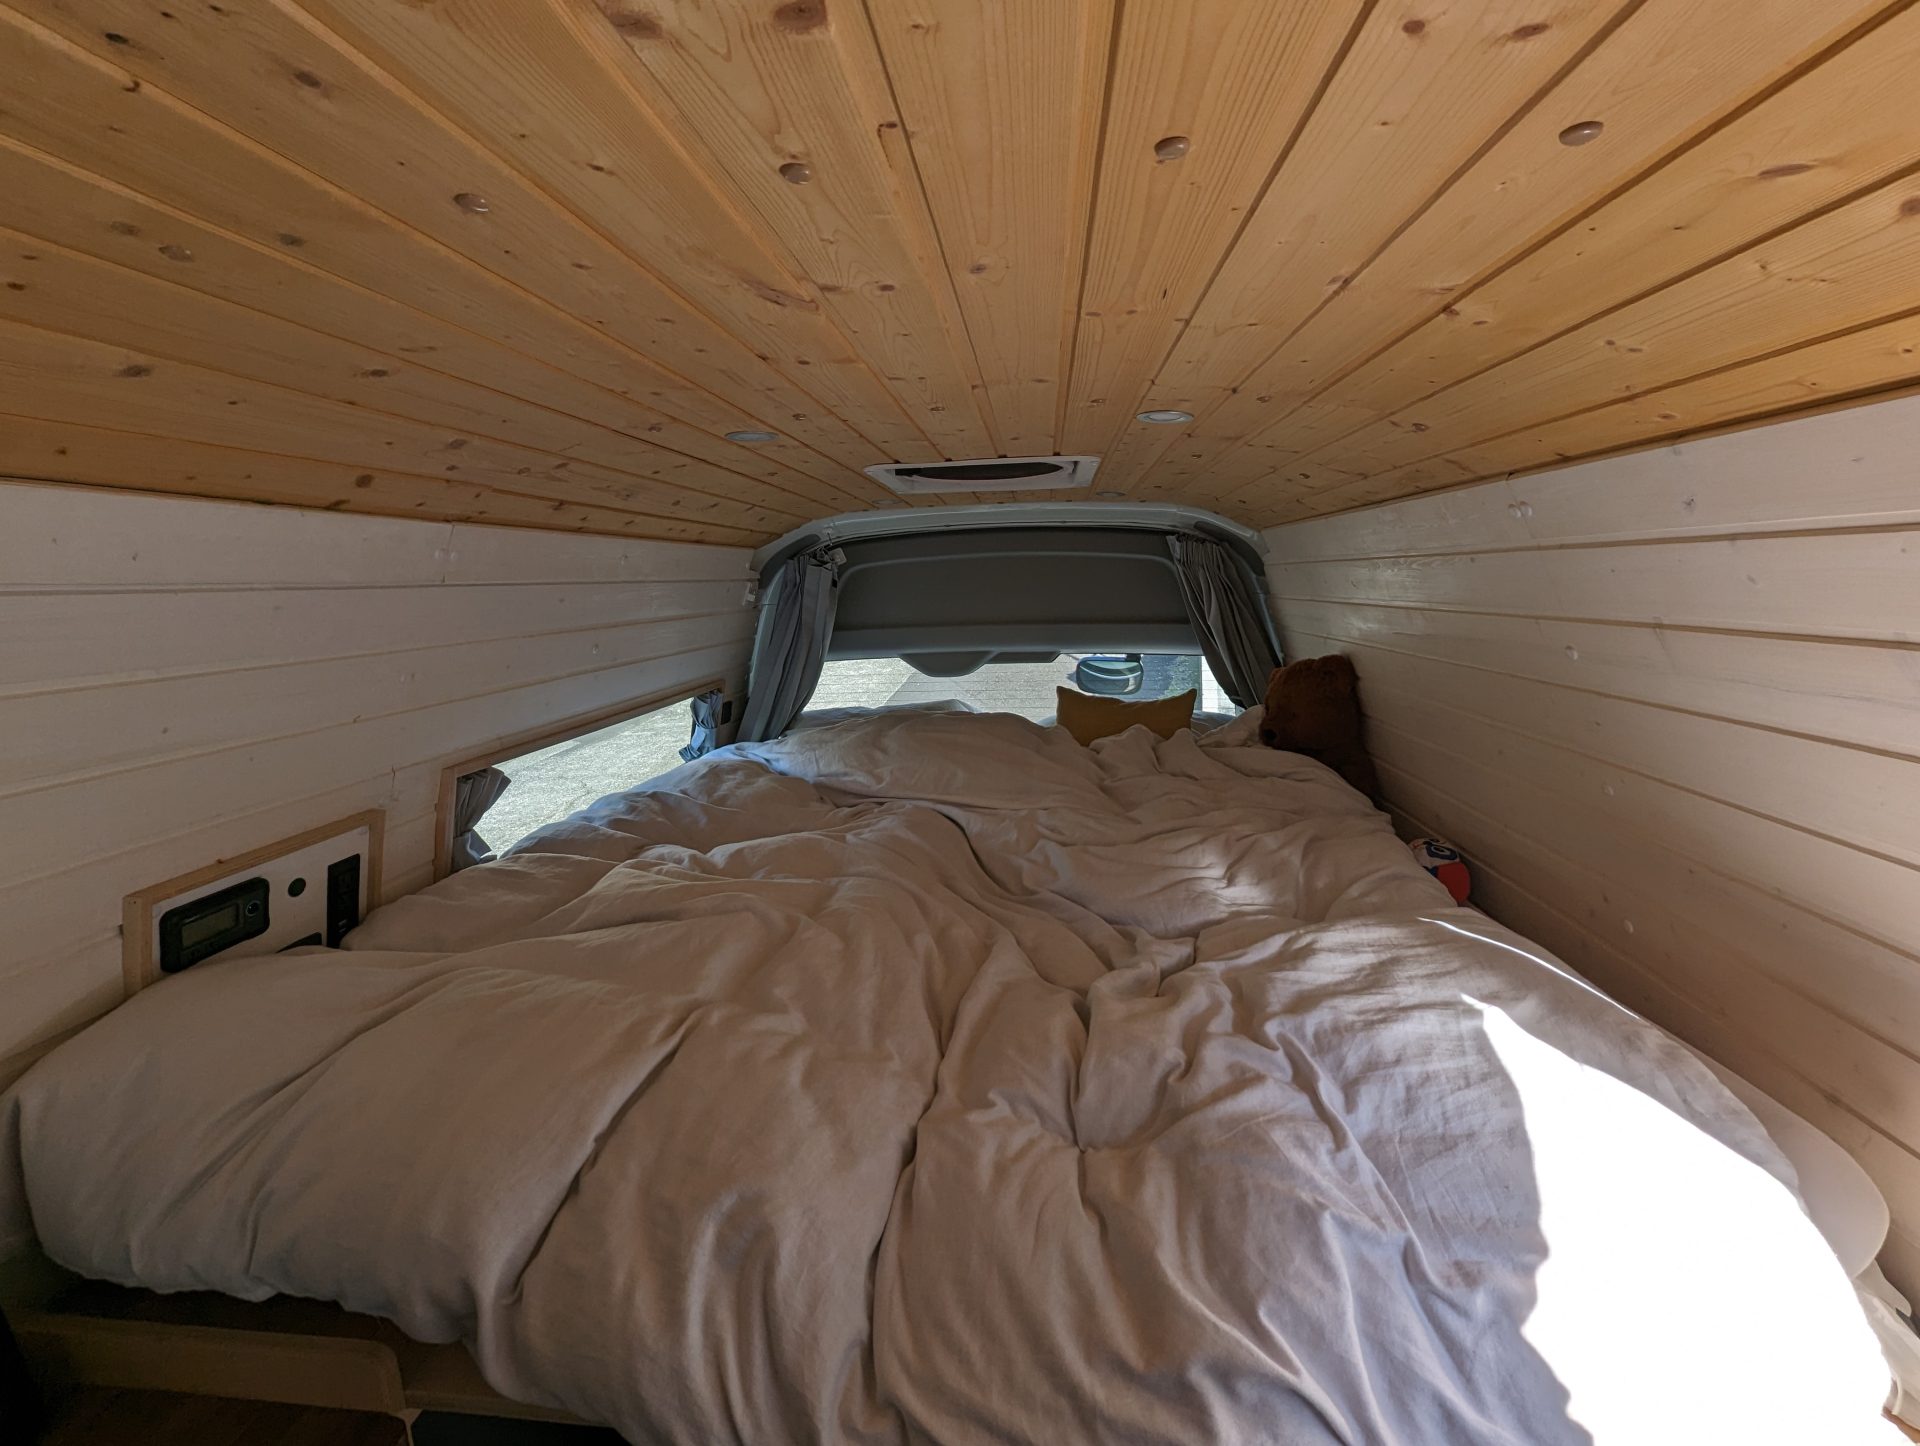 The Peugeot Rifter Gets The Vanlife Treatment In Japan